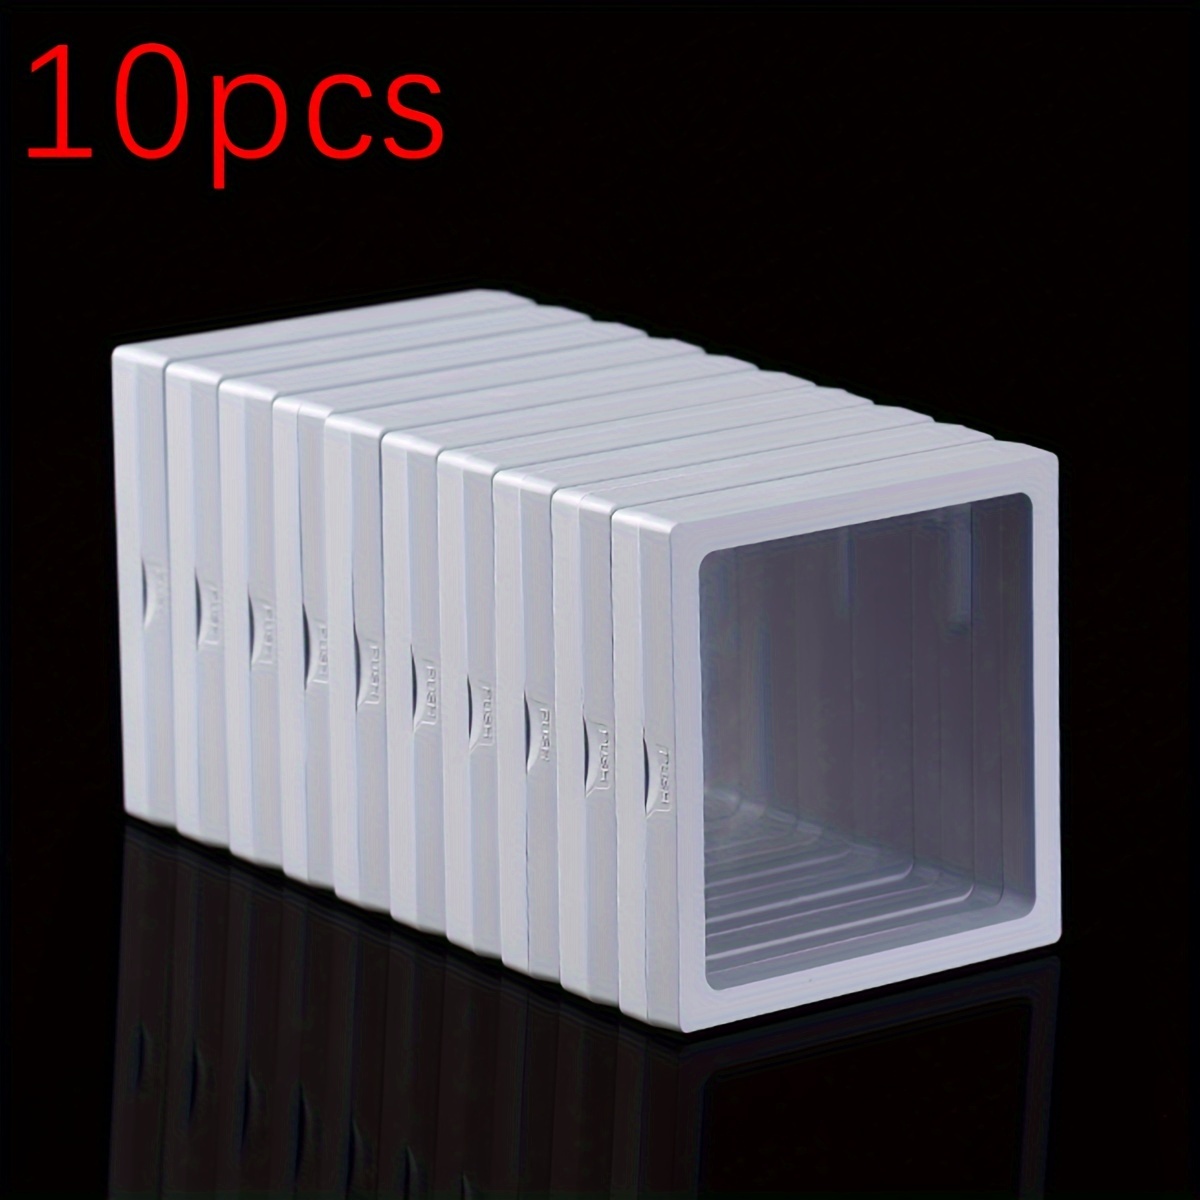 

10pcs Dust-proof And Oxidation Resistant Jewelry Box, Pe Film Jewelry Storage Packaging Box For Rings, Earrings, Bracelets, Necklaces